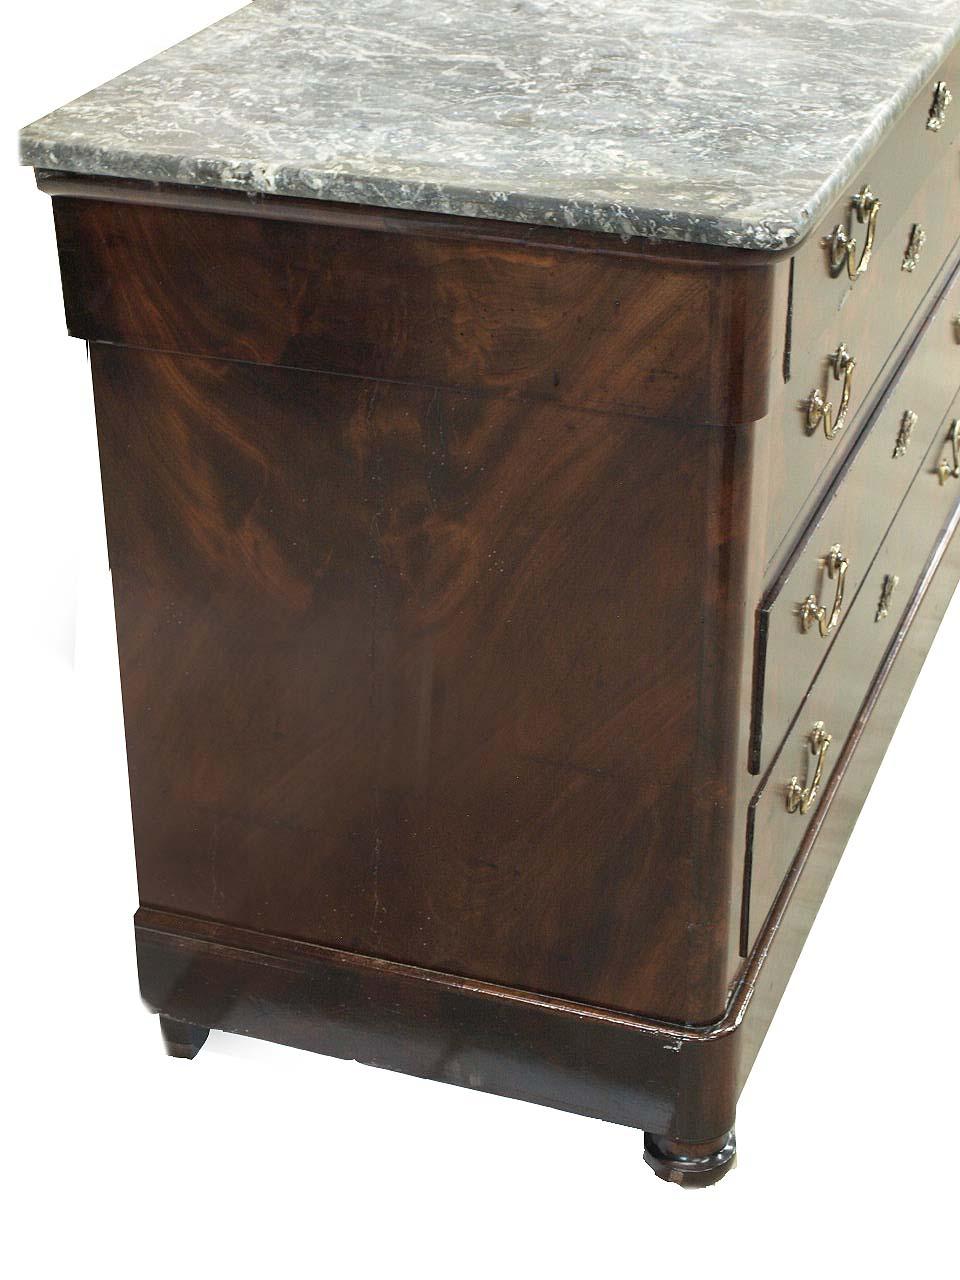 Louis Philippe marble top chest,  the gray and white marble with beautiful veining, especially the unusual large white area near the back(see photo),  the four graduated drawers with bail pulls and flame mahogany veneer, resting on turned front